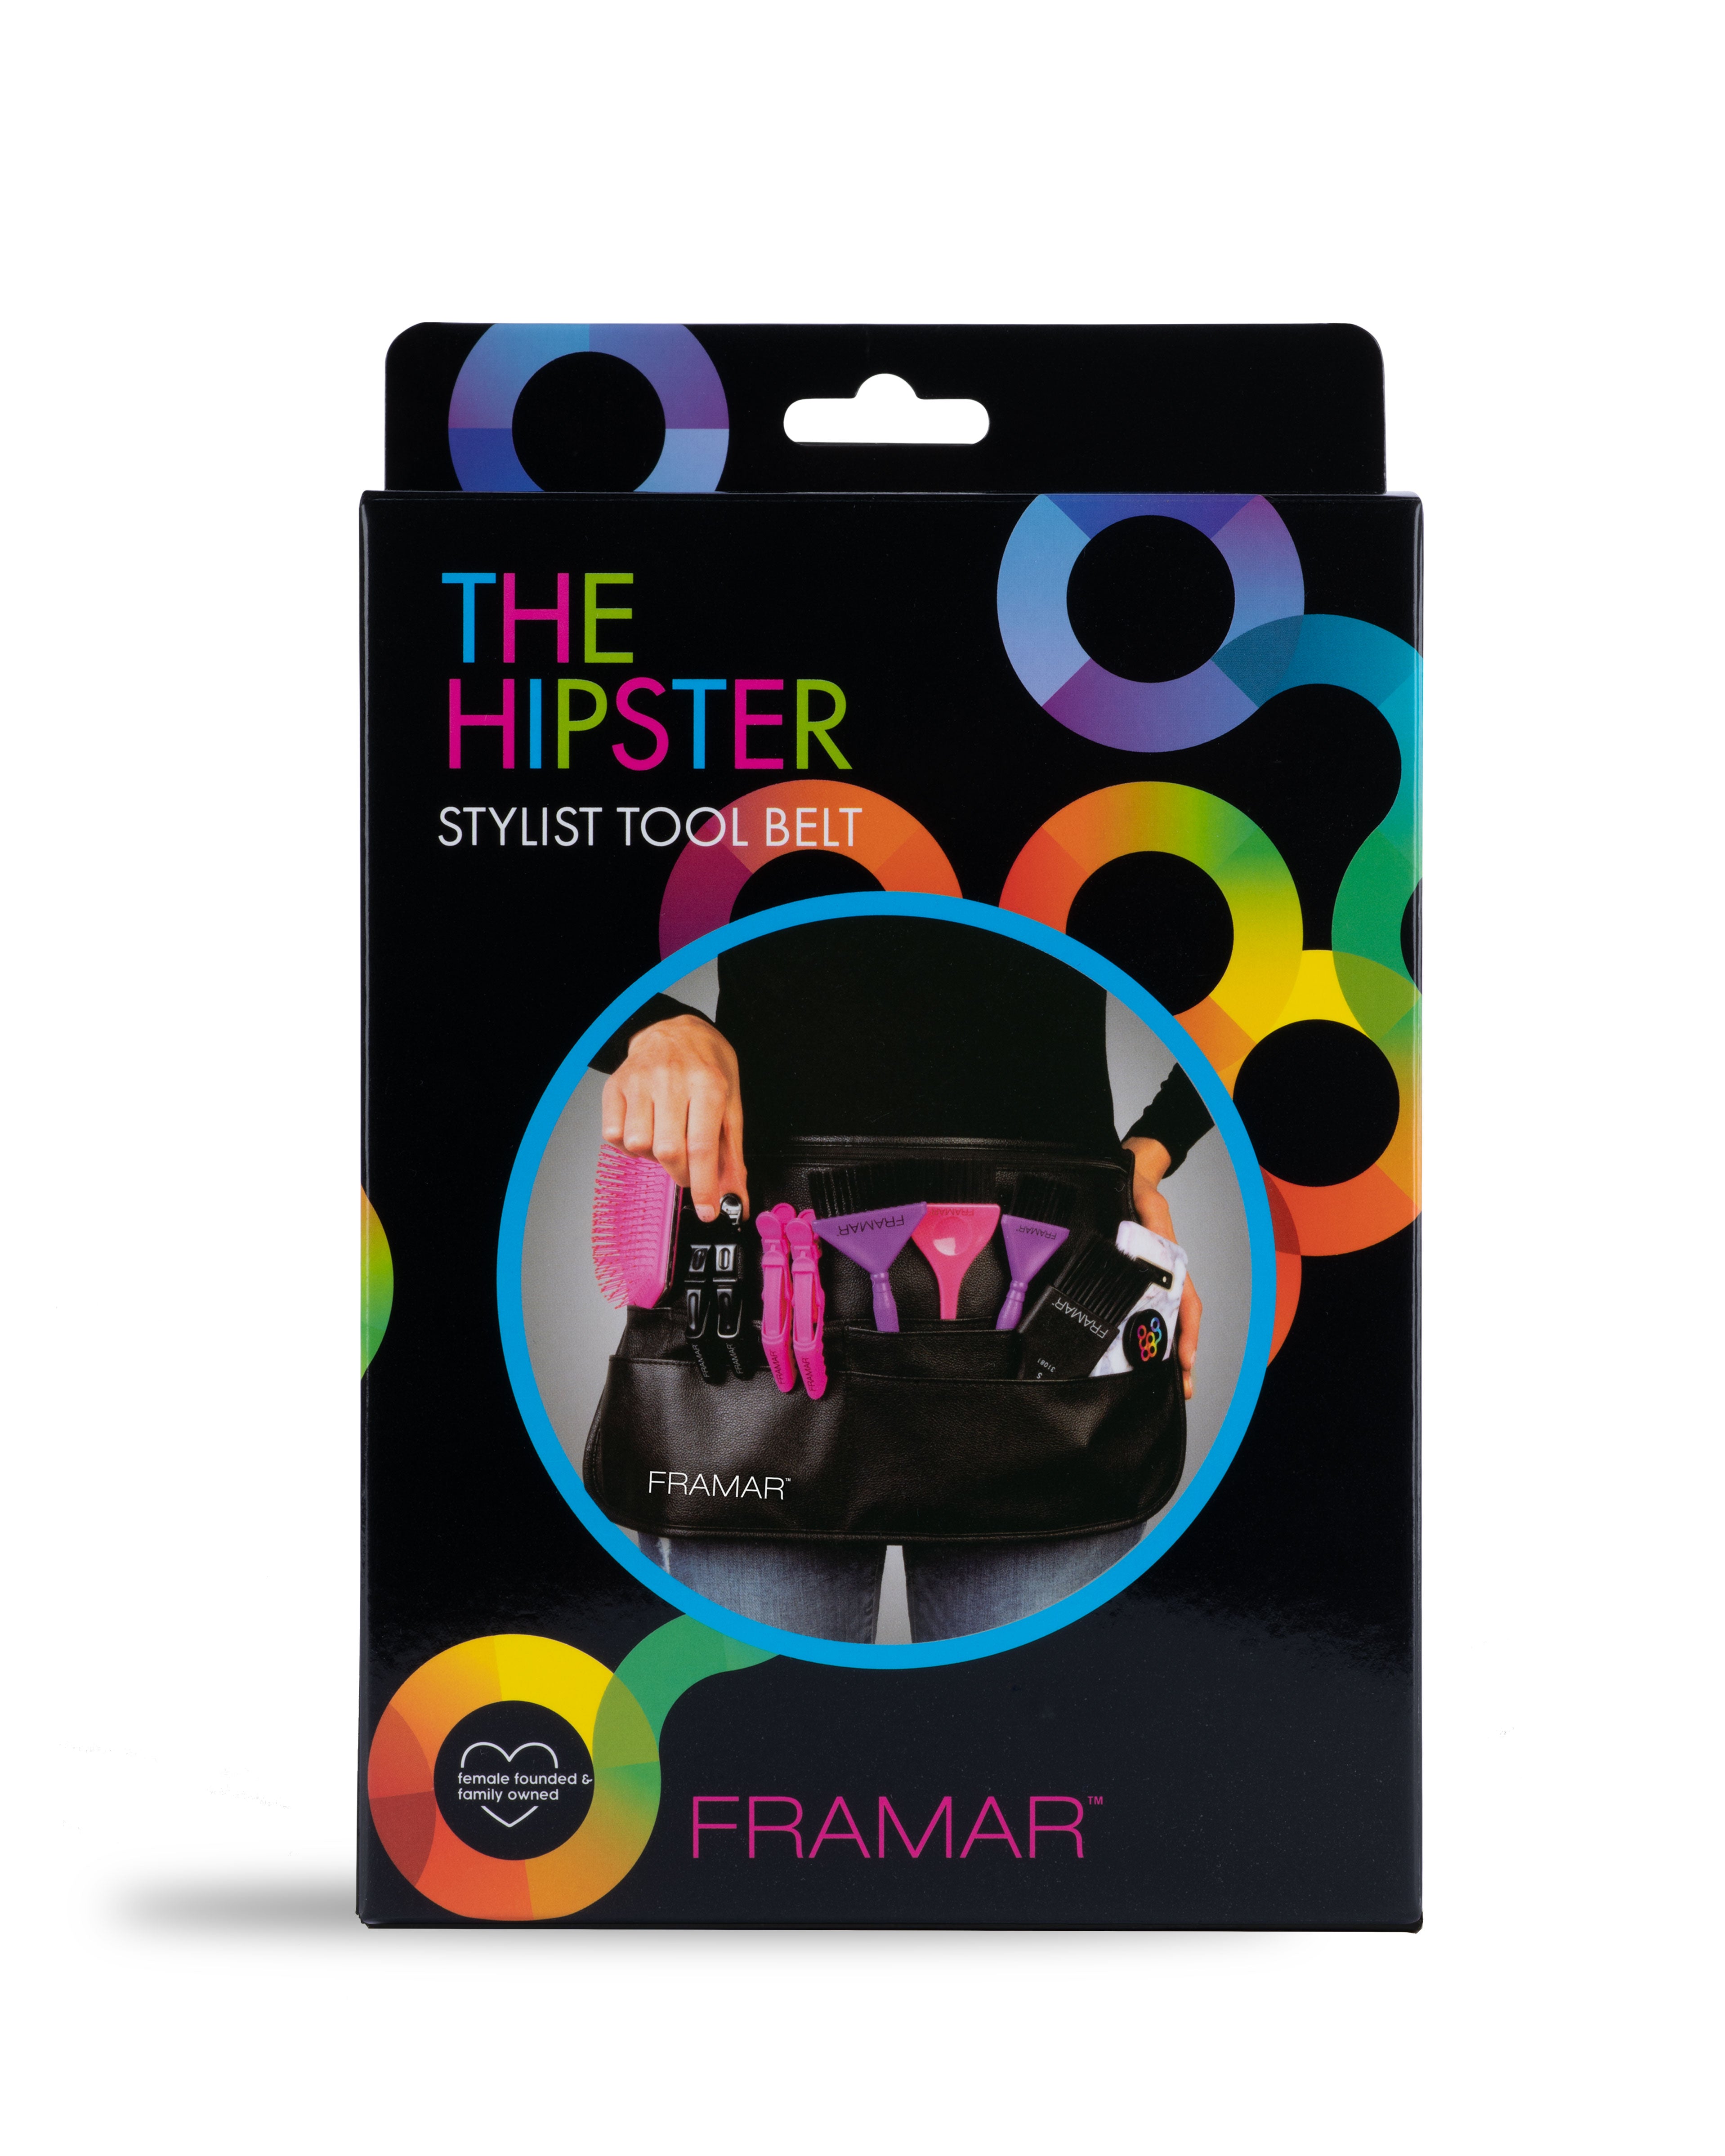 Framar Stylist Toolbelt - The Hipster - Creata Beauty - Professional Beauty Products